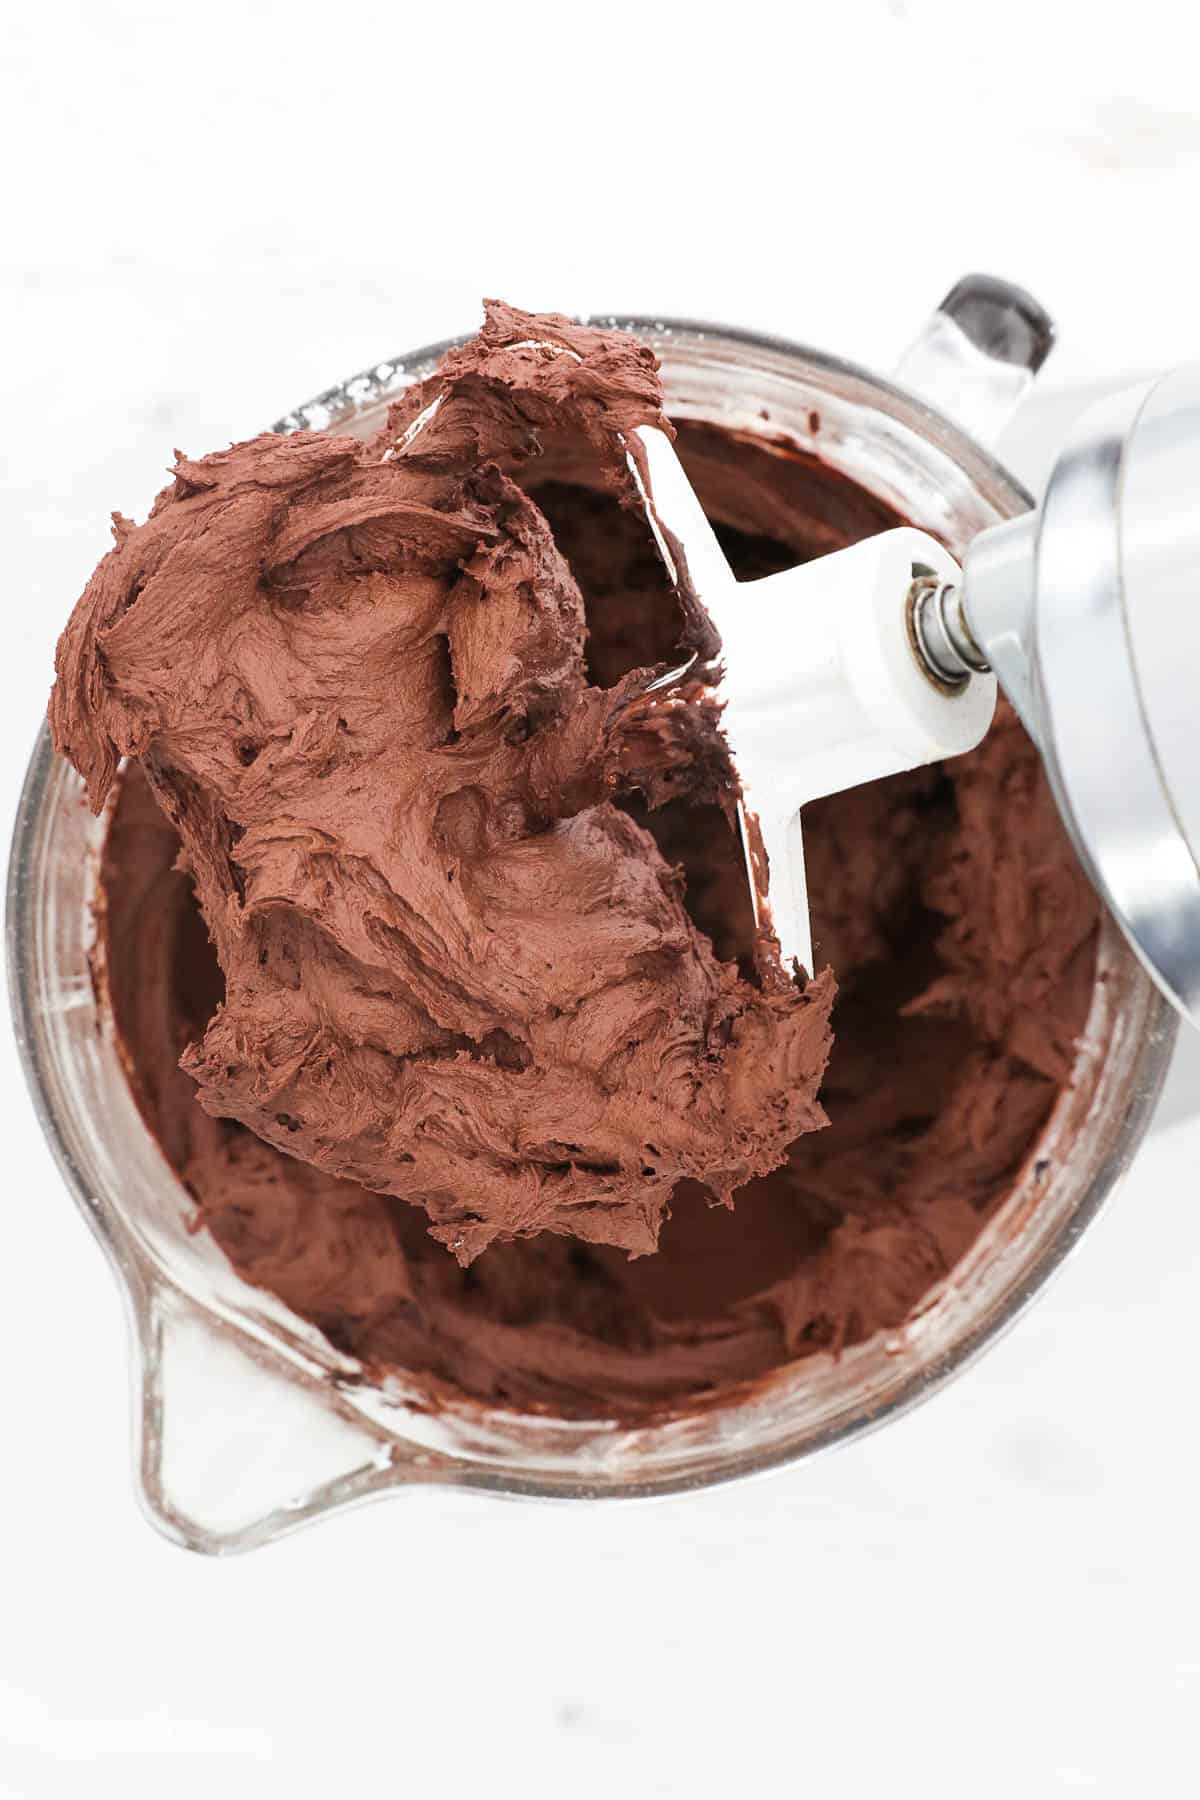 A stand mixer blade of chocolate frosting over a glass mixing bowl